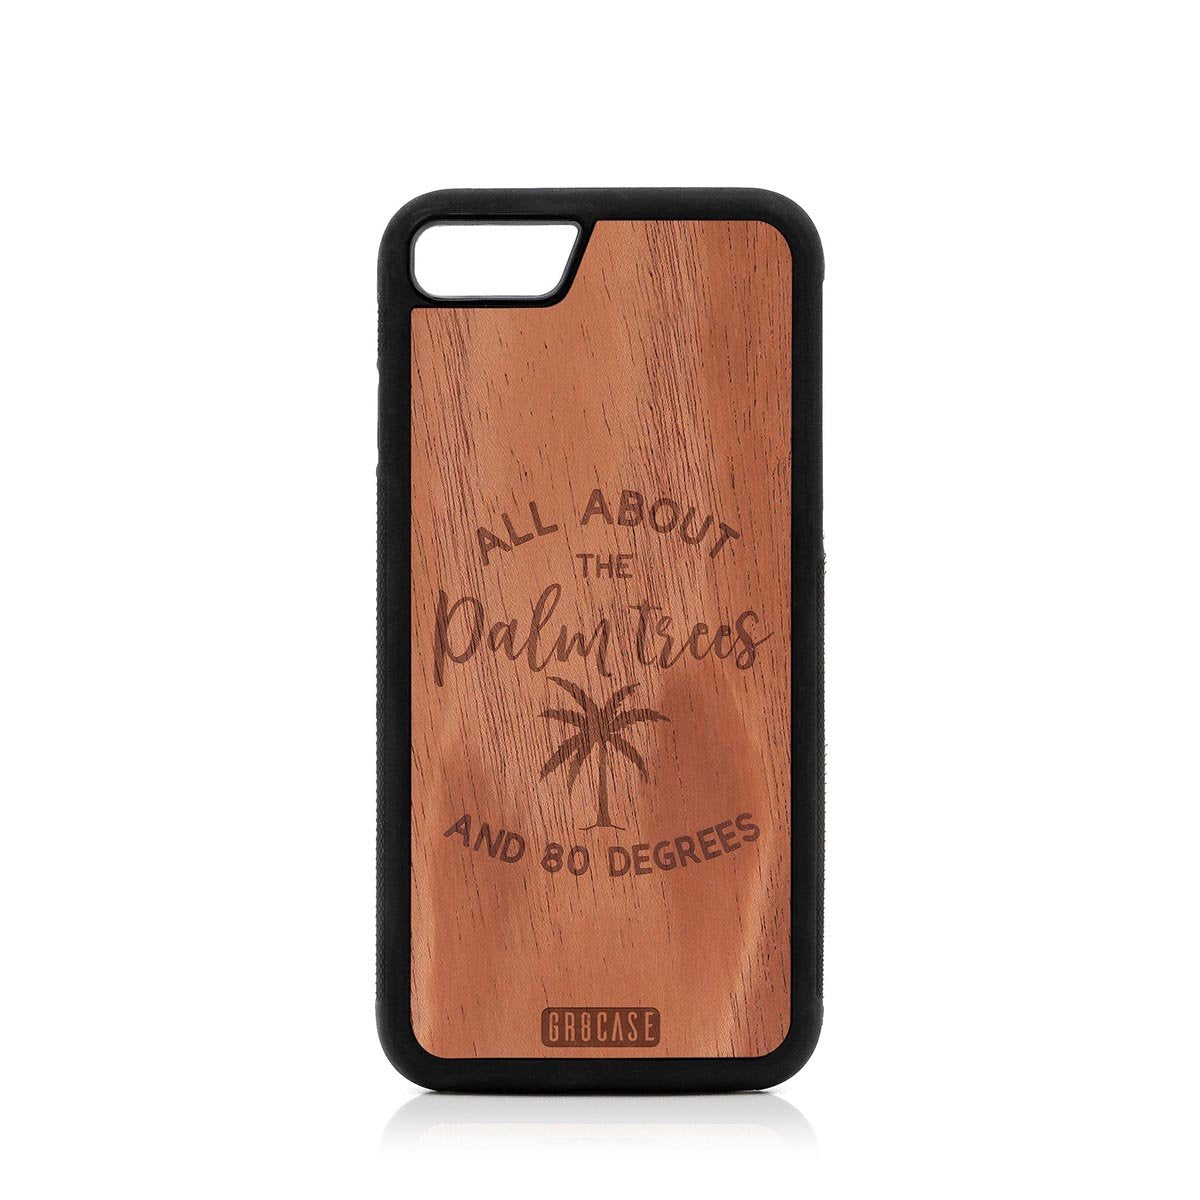 All About The Palm Trees and 80 Degrees Design Wood Case For iPhone SE 2020 by GR8CASE